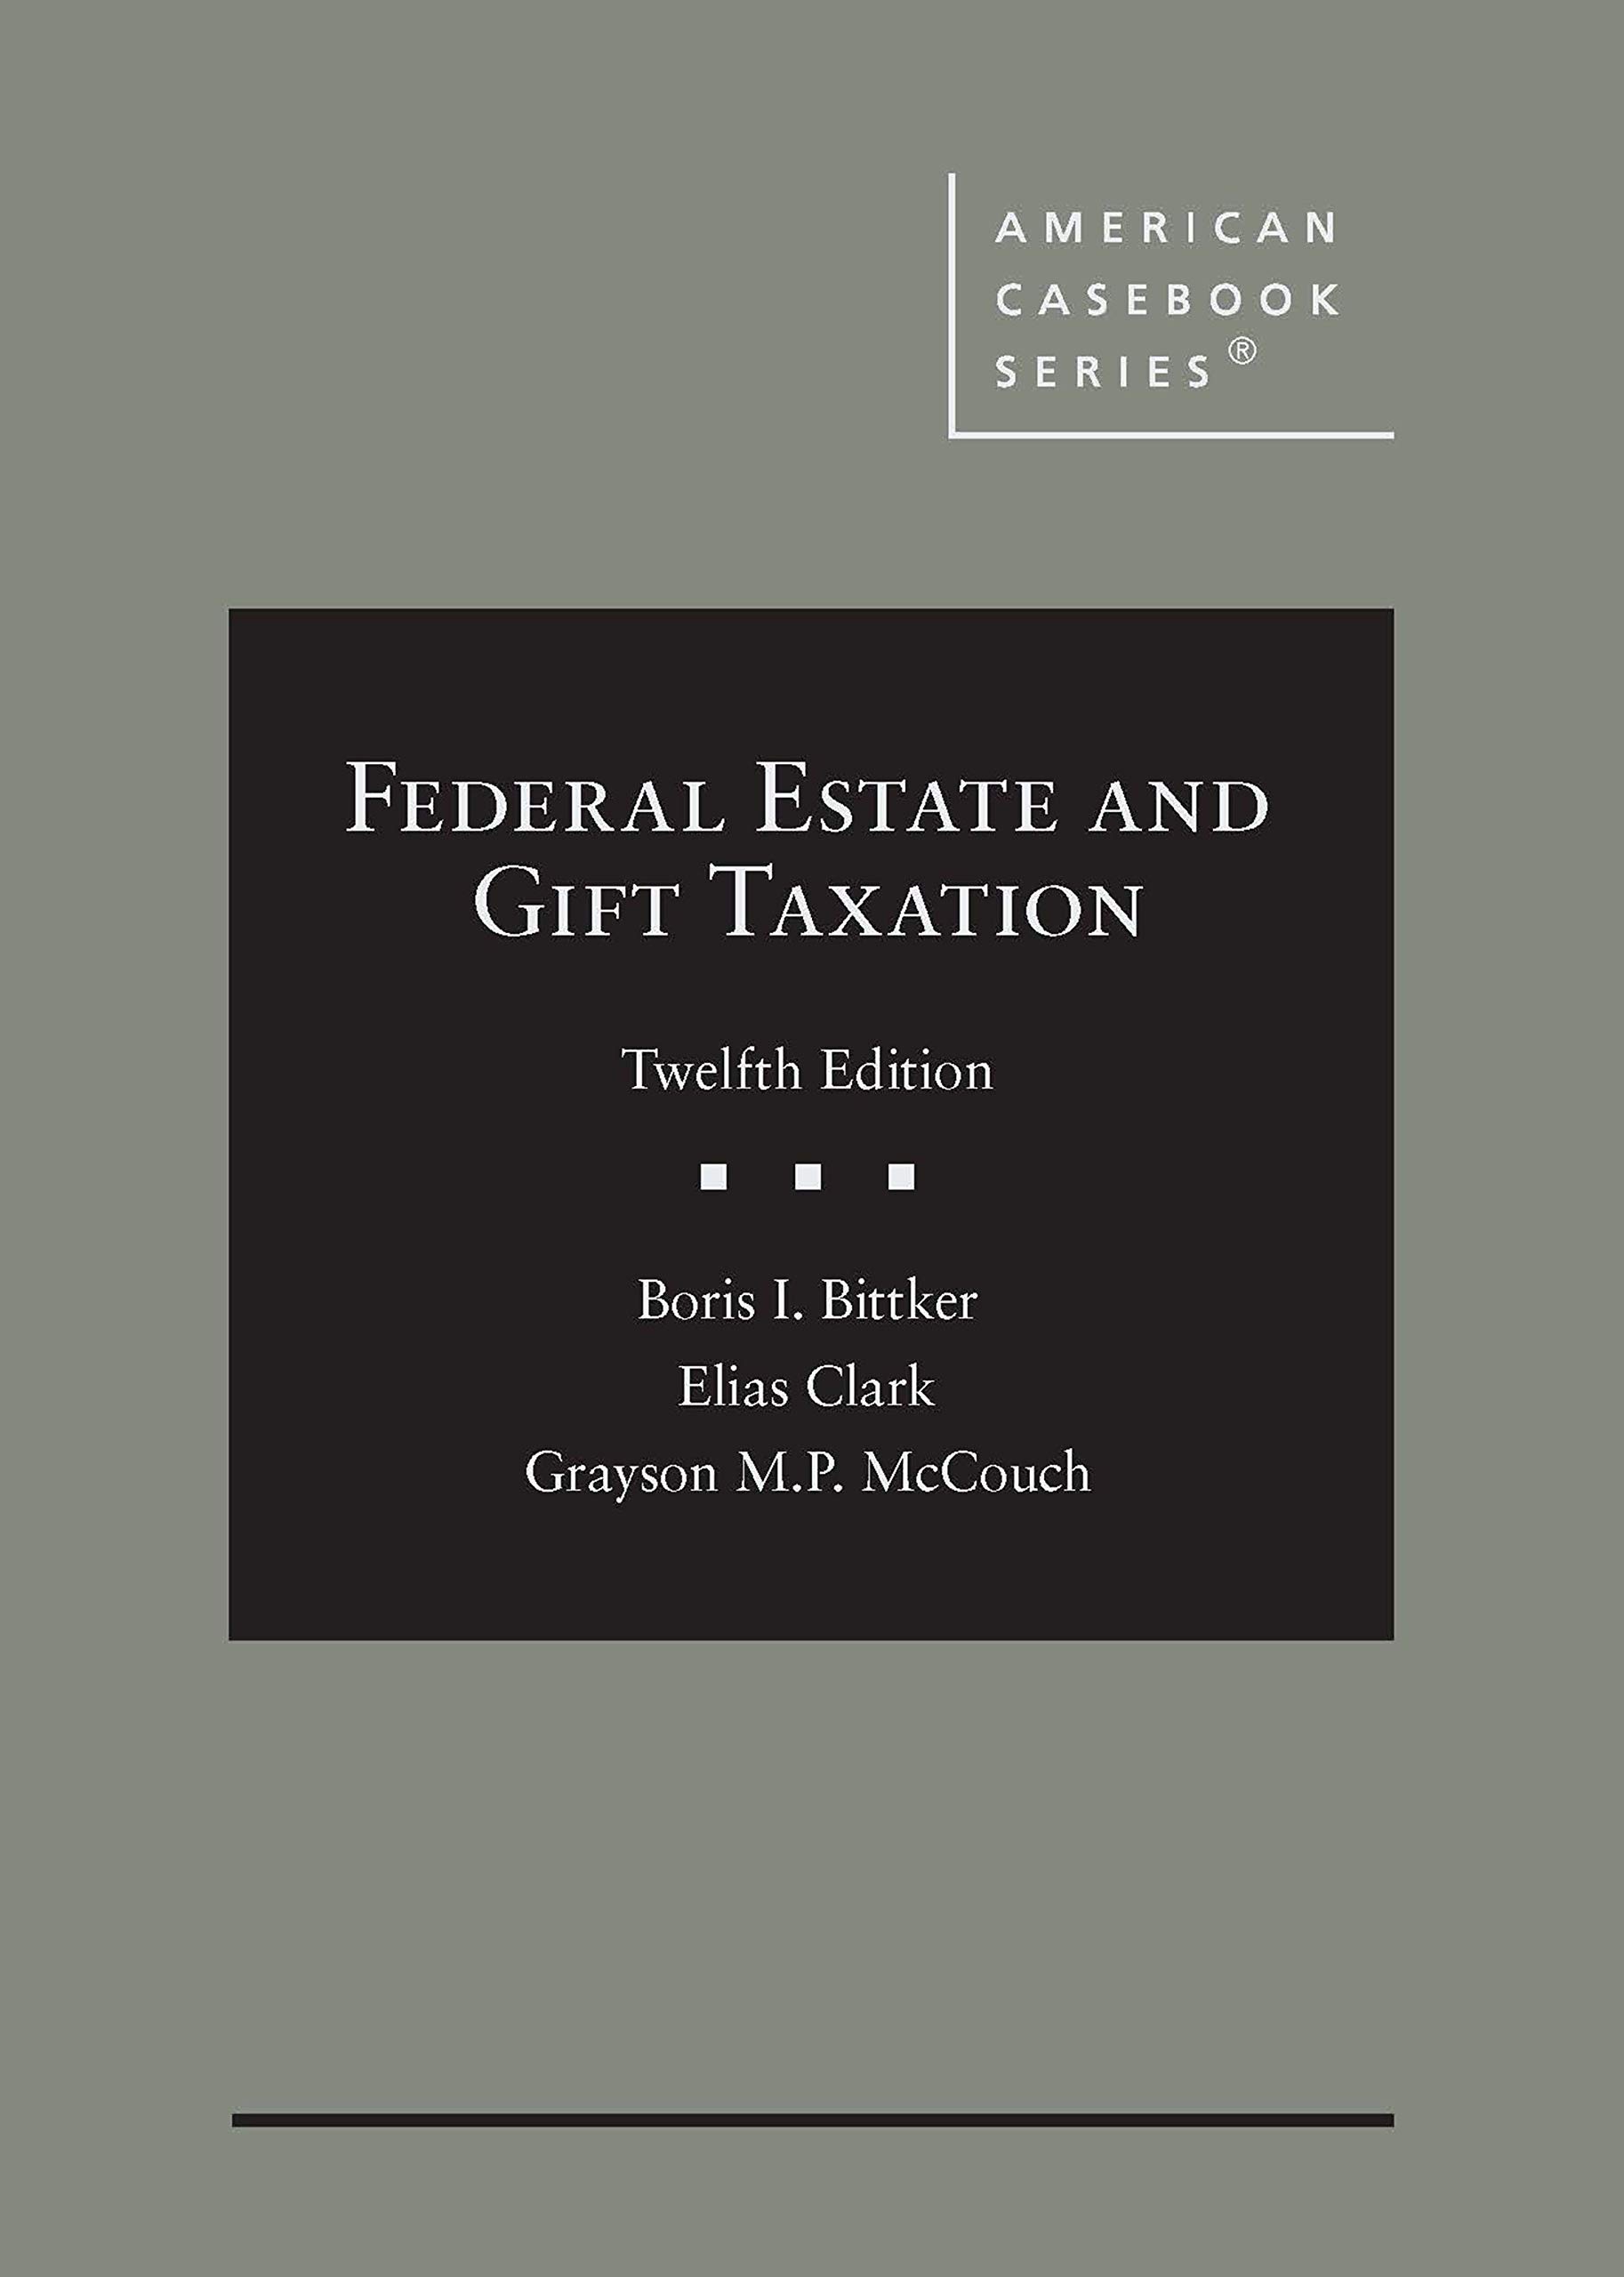 Federal Estate and Gift Taxation 12th Edition by Boris Bittker 